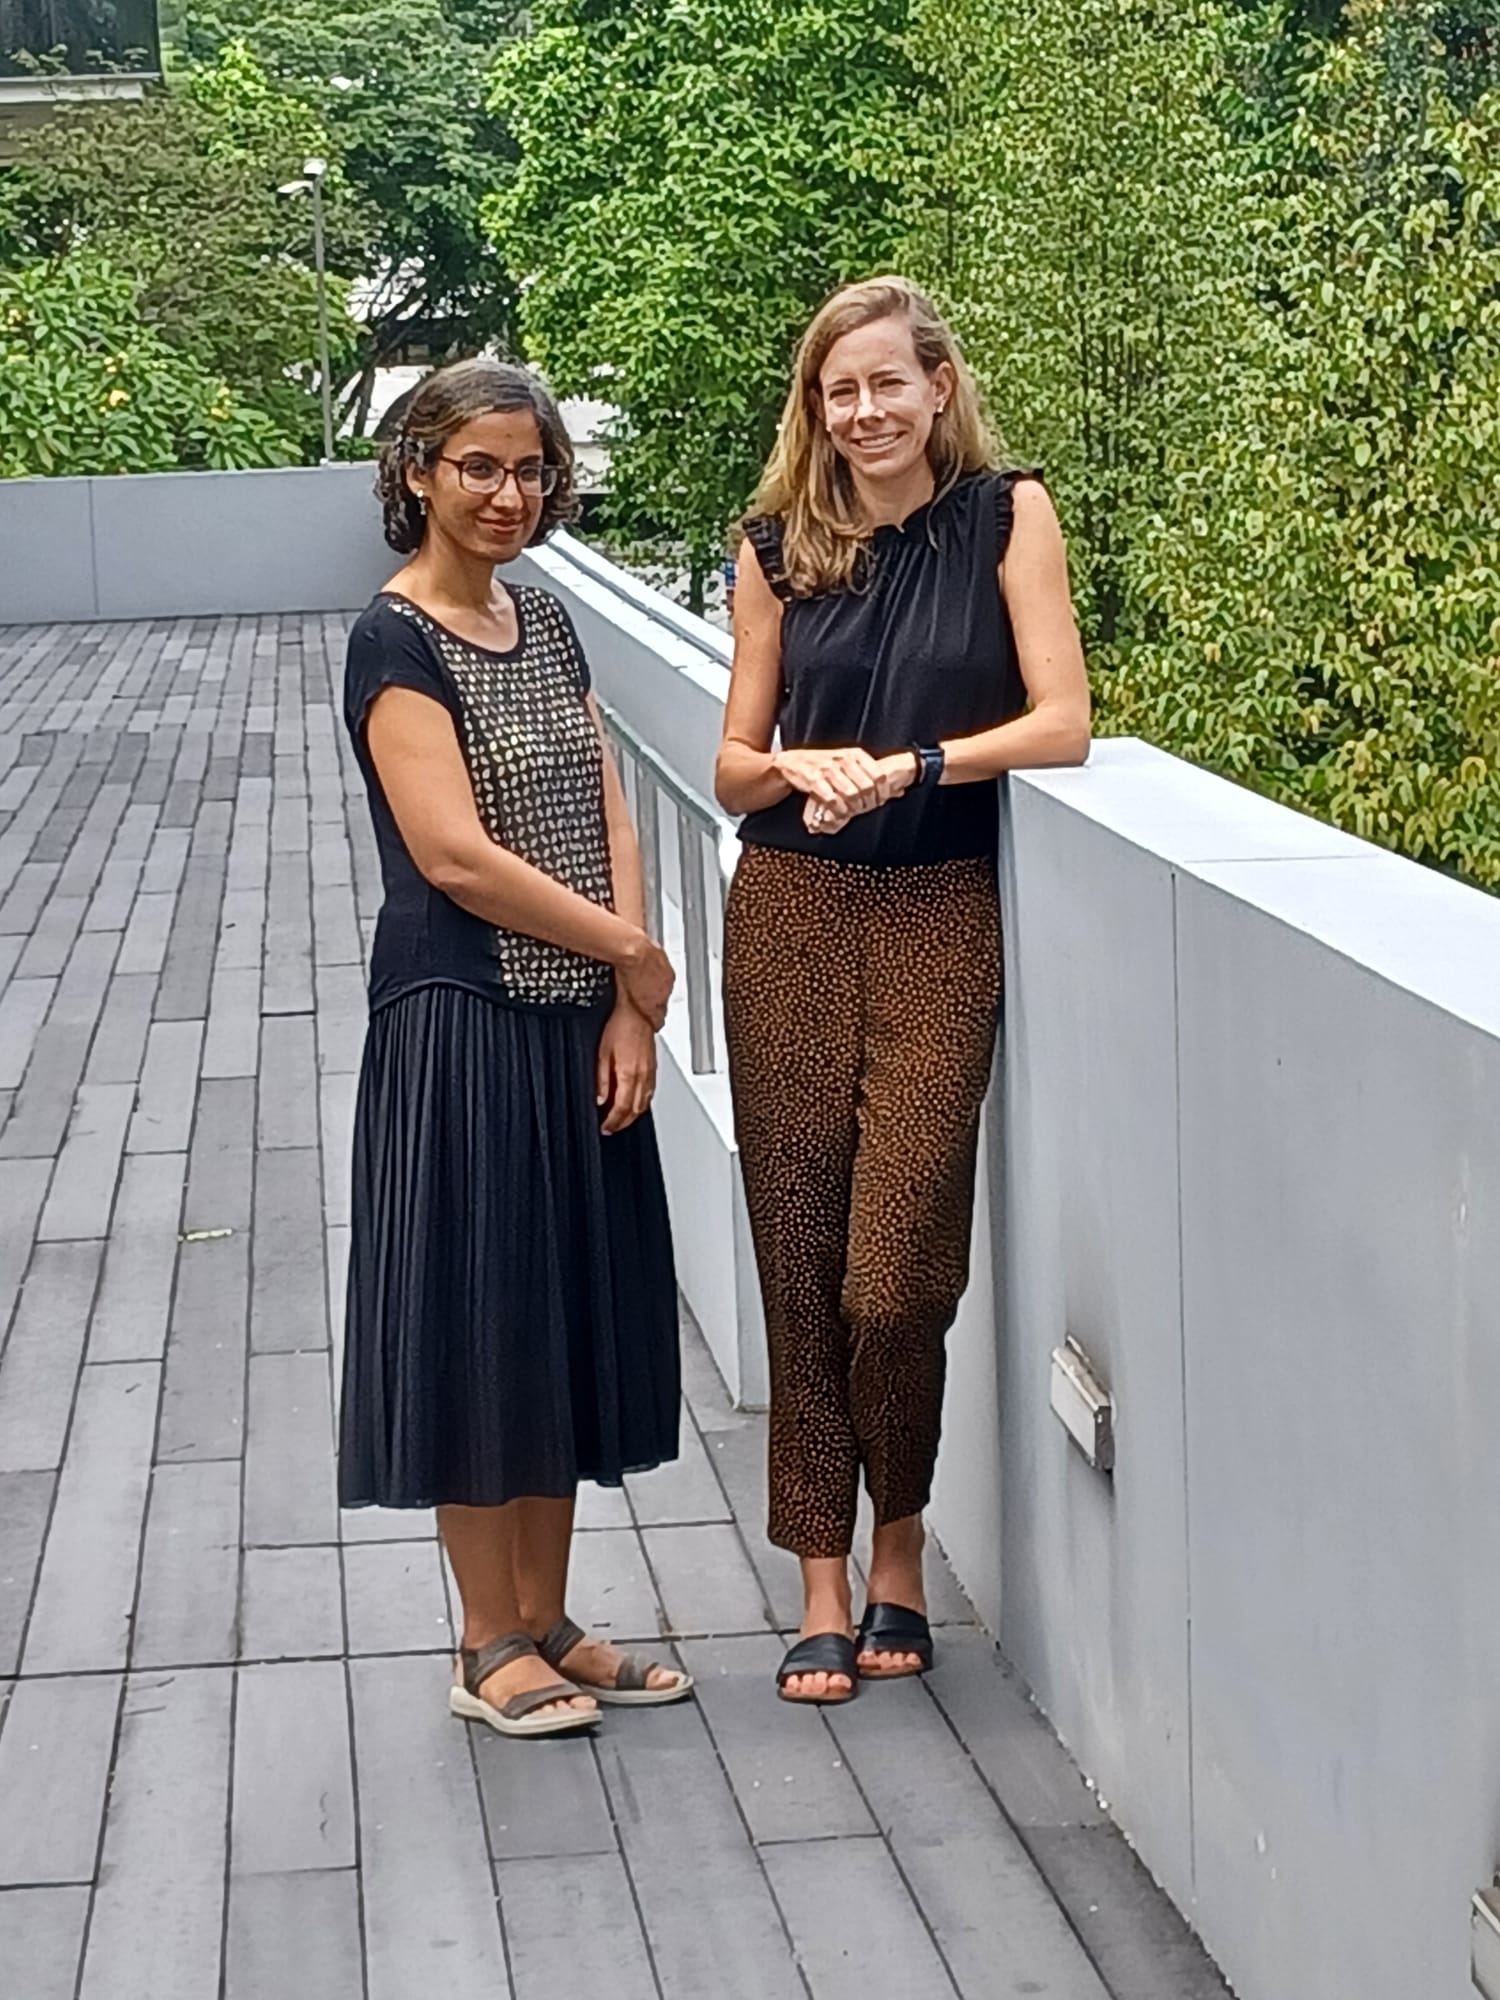 Assistant Professor Chetna Malhotra and Dr Ellie Bostwick Andres